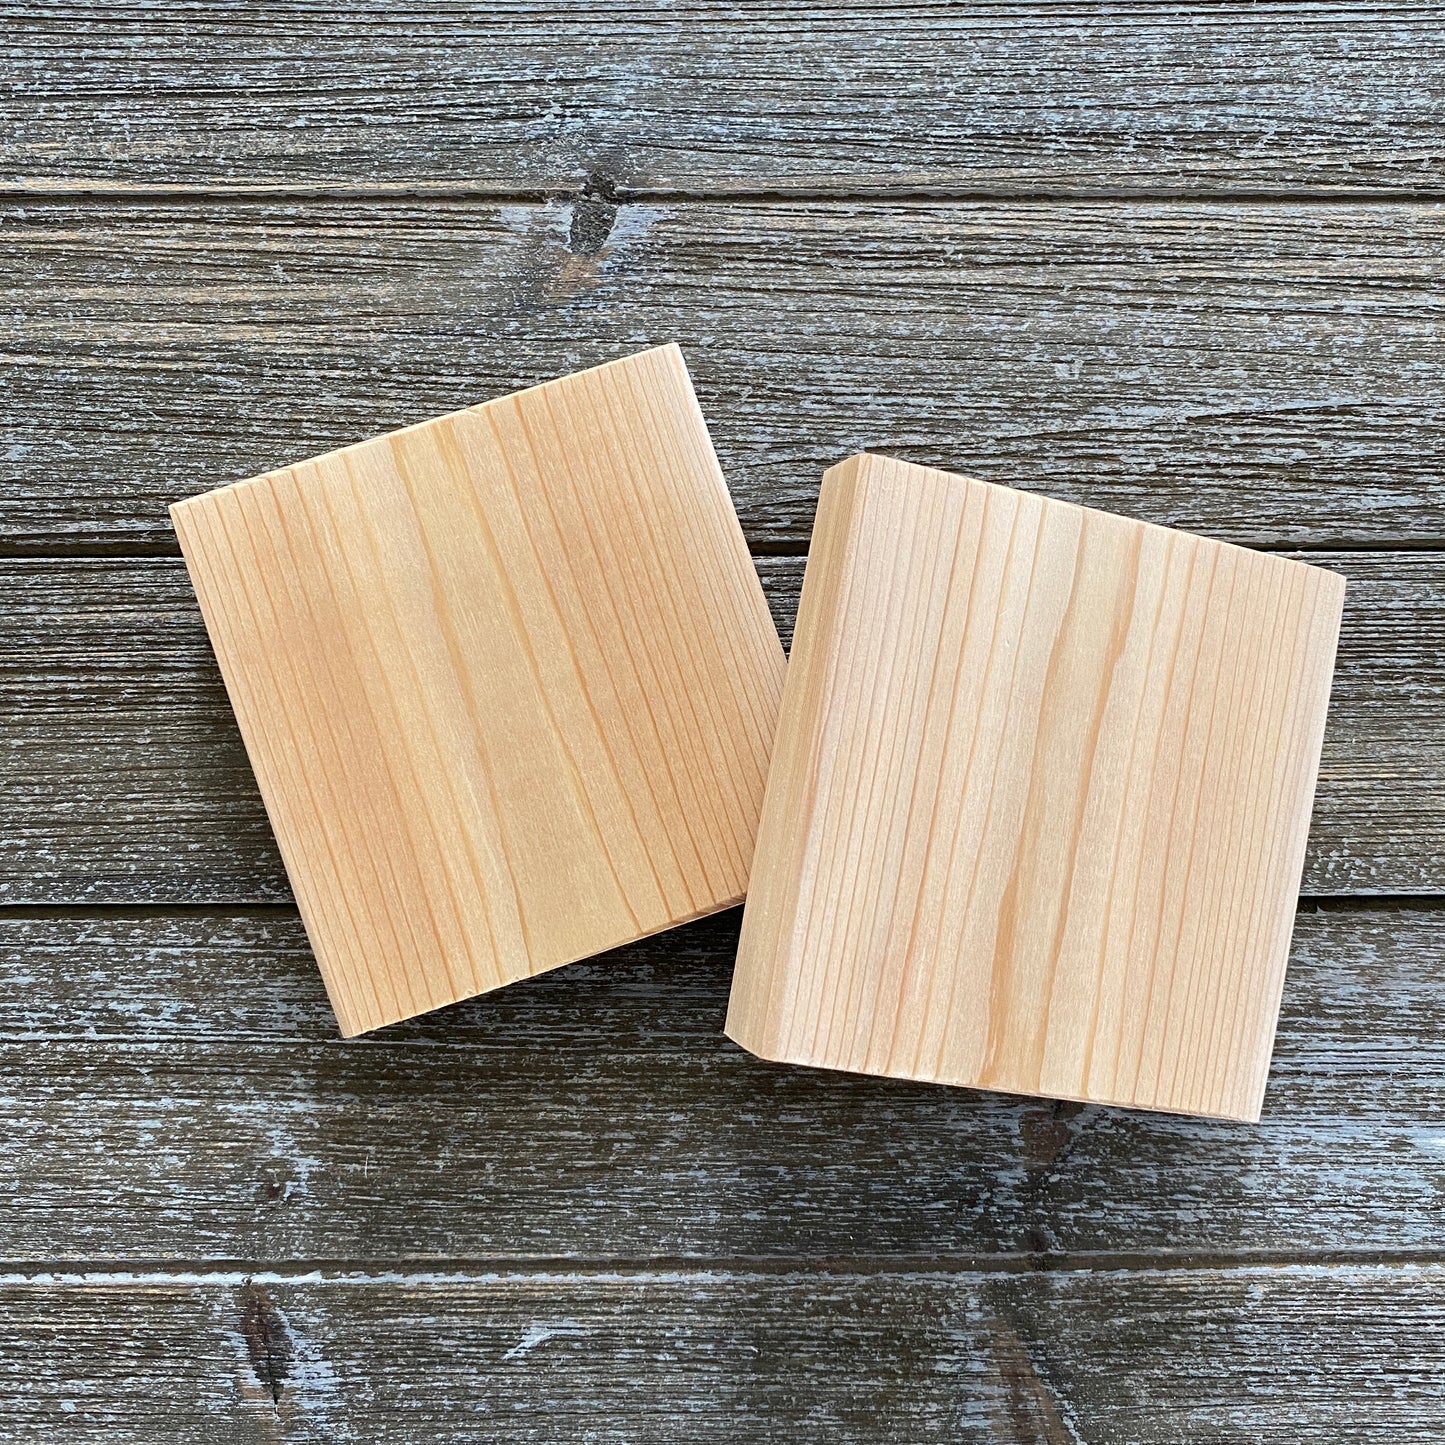 Unfinished Wood Squares for Crafts - 2 pc set